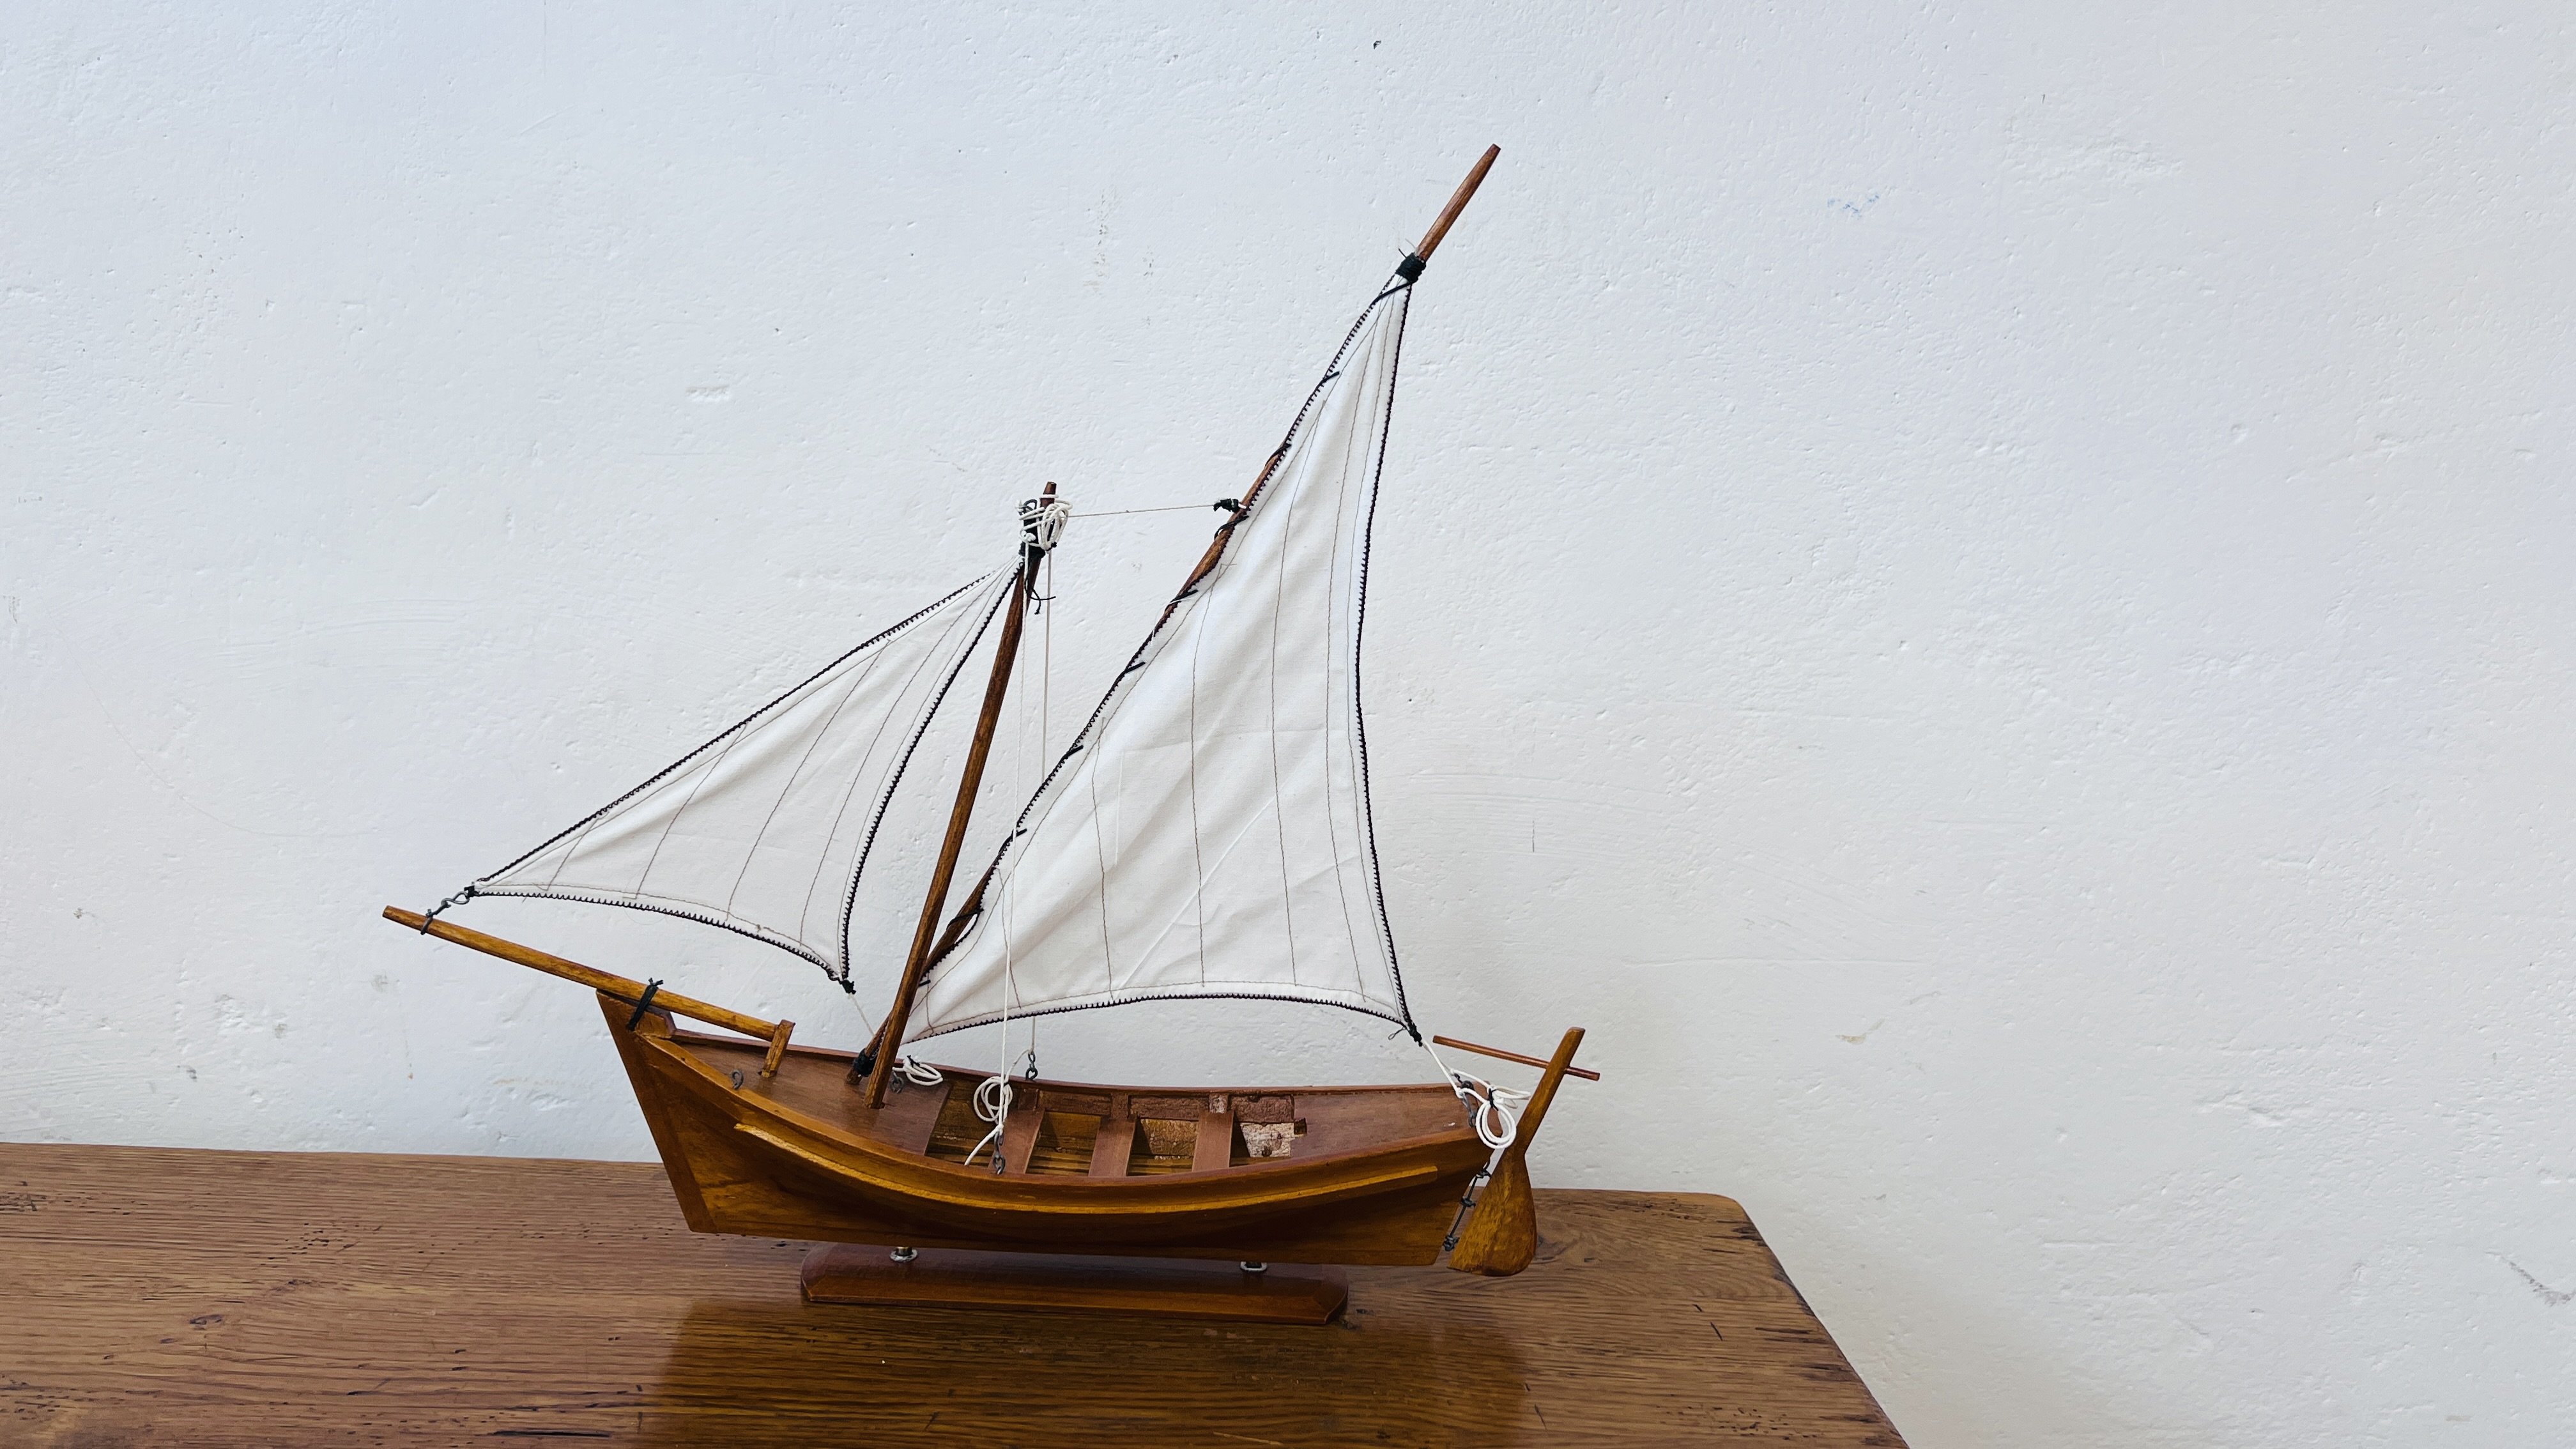 A MODEL WOODEN GALLEON LENGTH 80CM, HEIGHT 60CM AND A WOODEN SAILING BOAT MODEL LENGTH 43CM, - Image 8 of 10